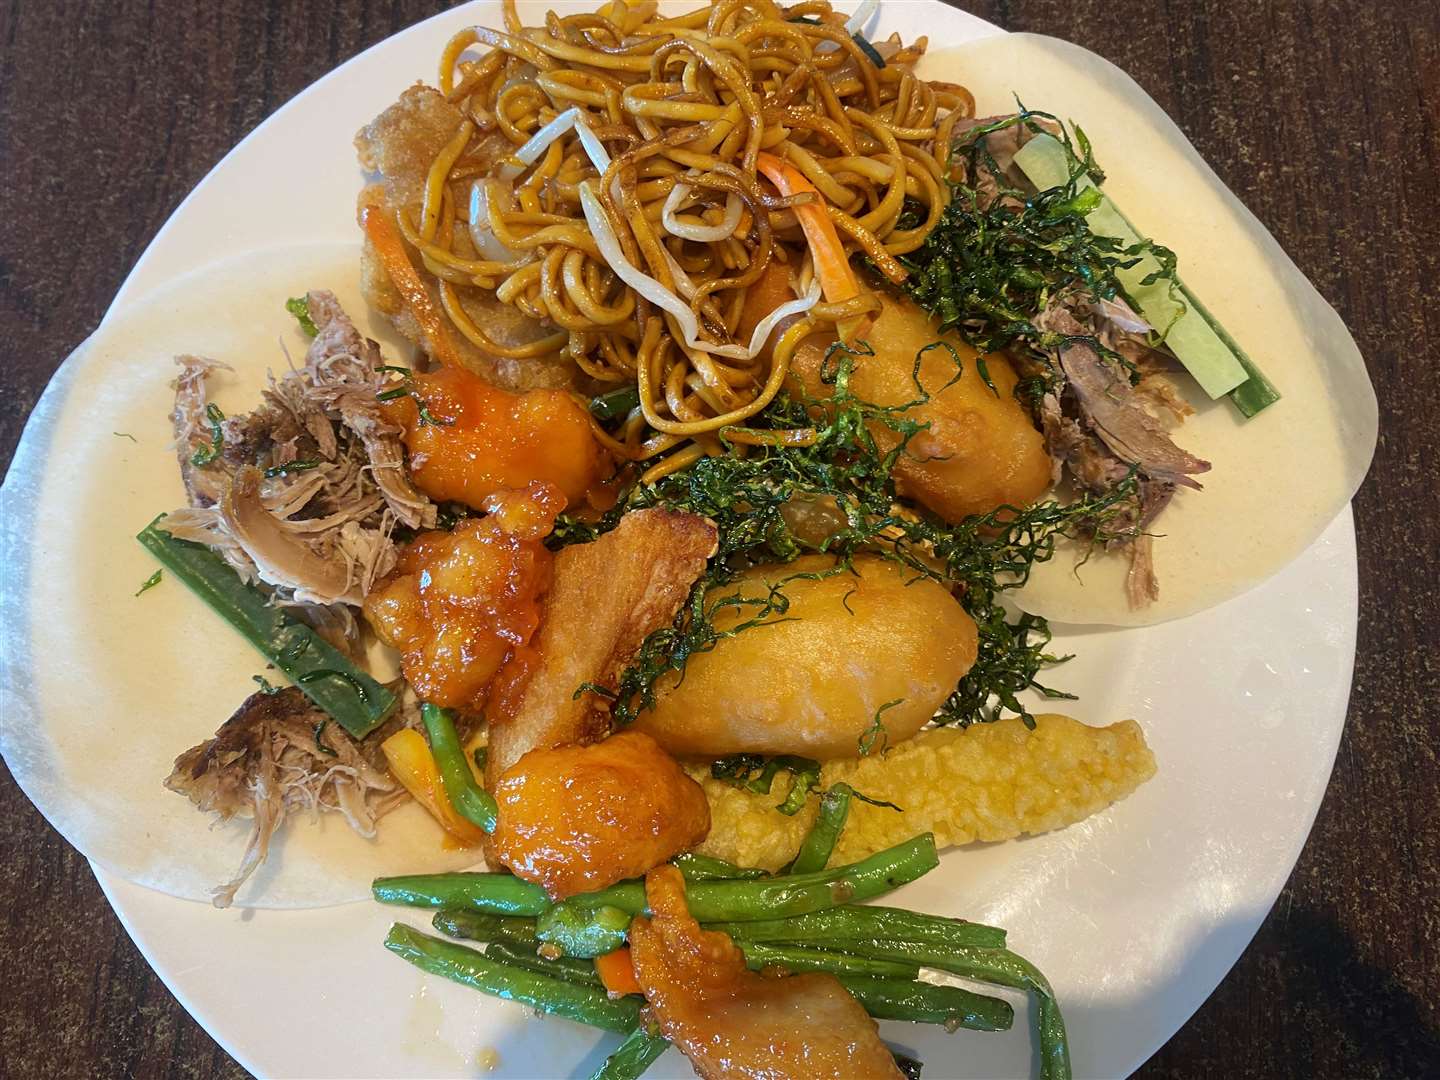 Brandon’s plate of food, featuring duck wraps, seaweed, chicken balls, chicken with Thai sweet chilli sauce, prawn toast and chow mein